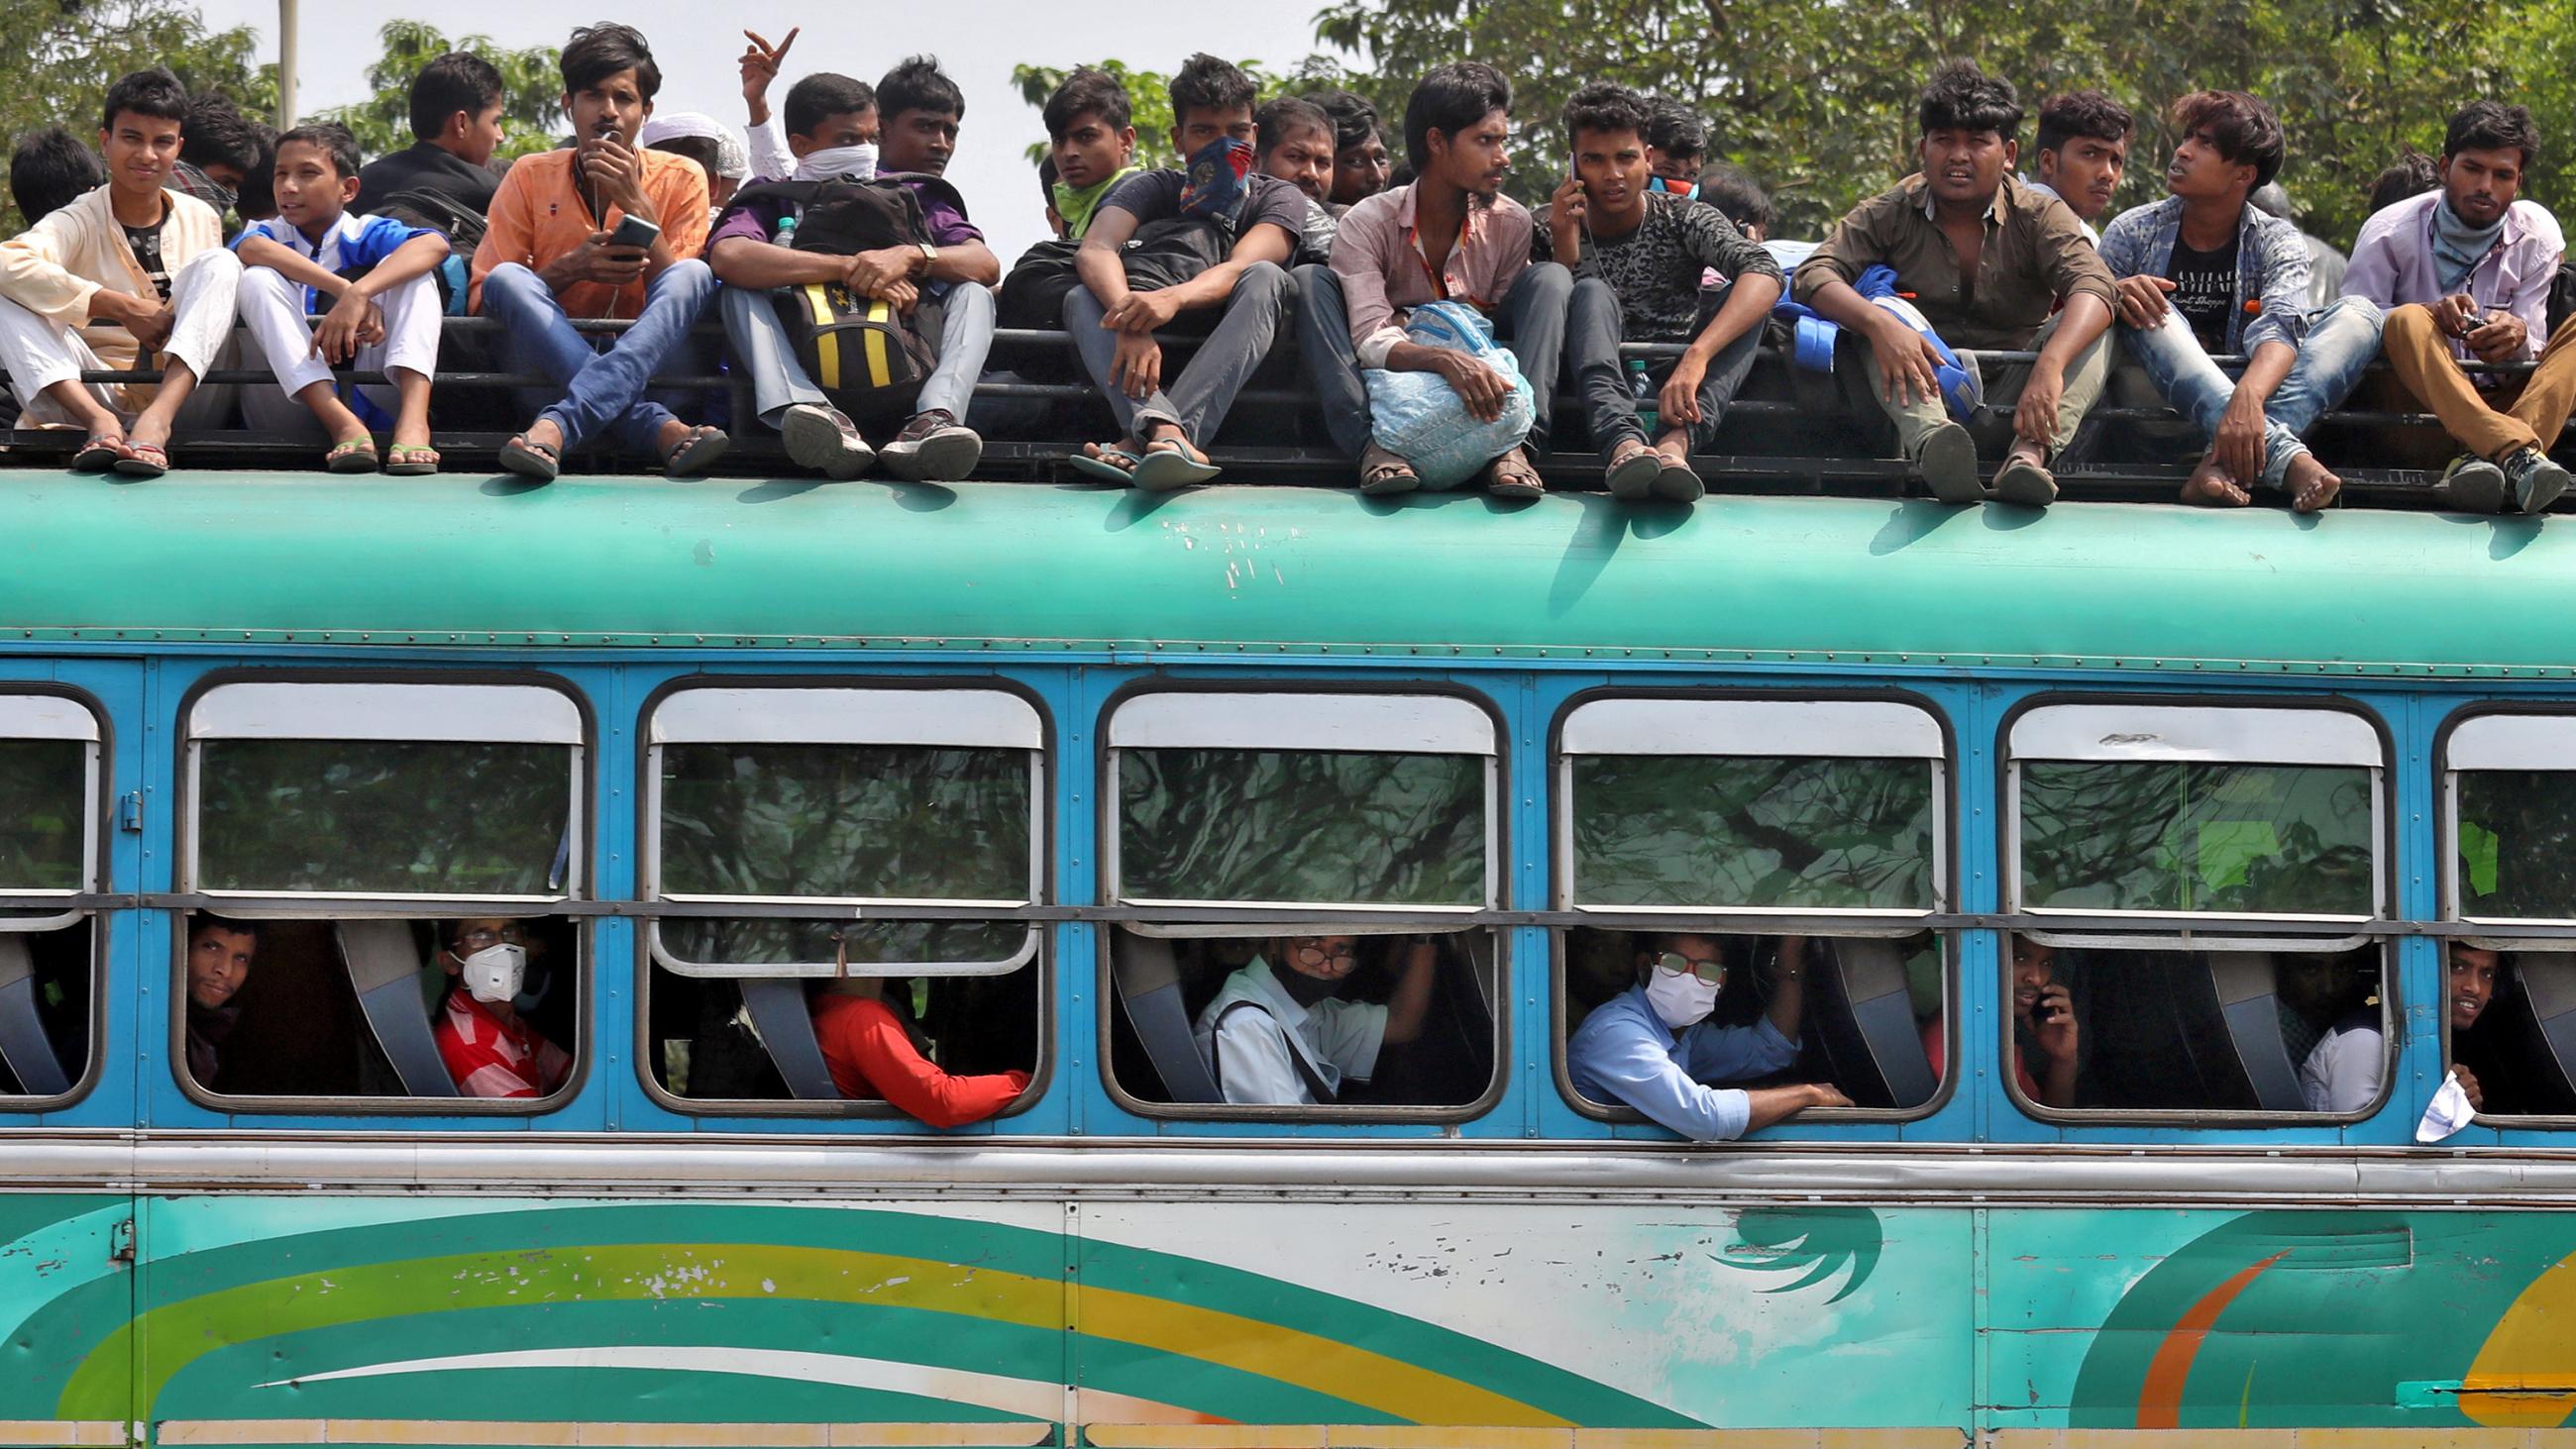 This is a stunning photo of a passenger bus with people sitting on top and in all the aisles inside. 